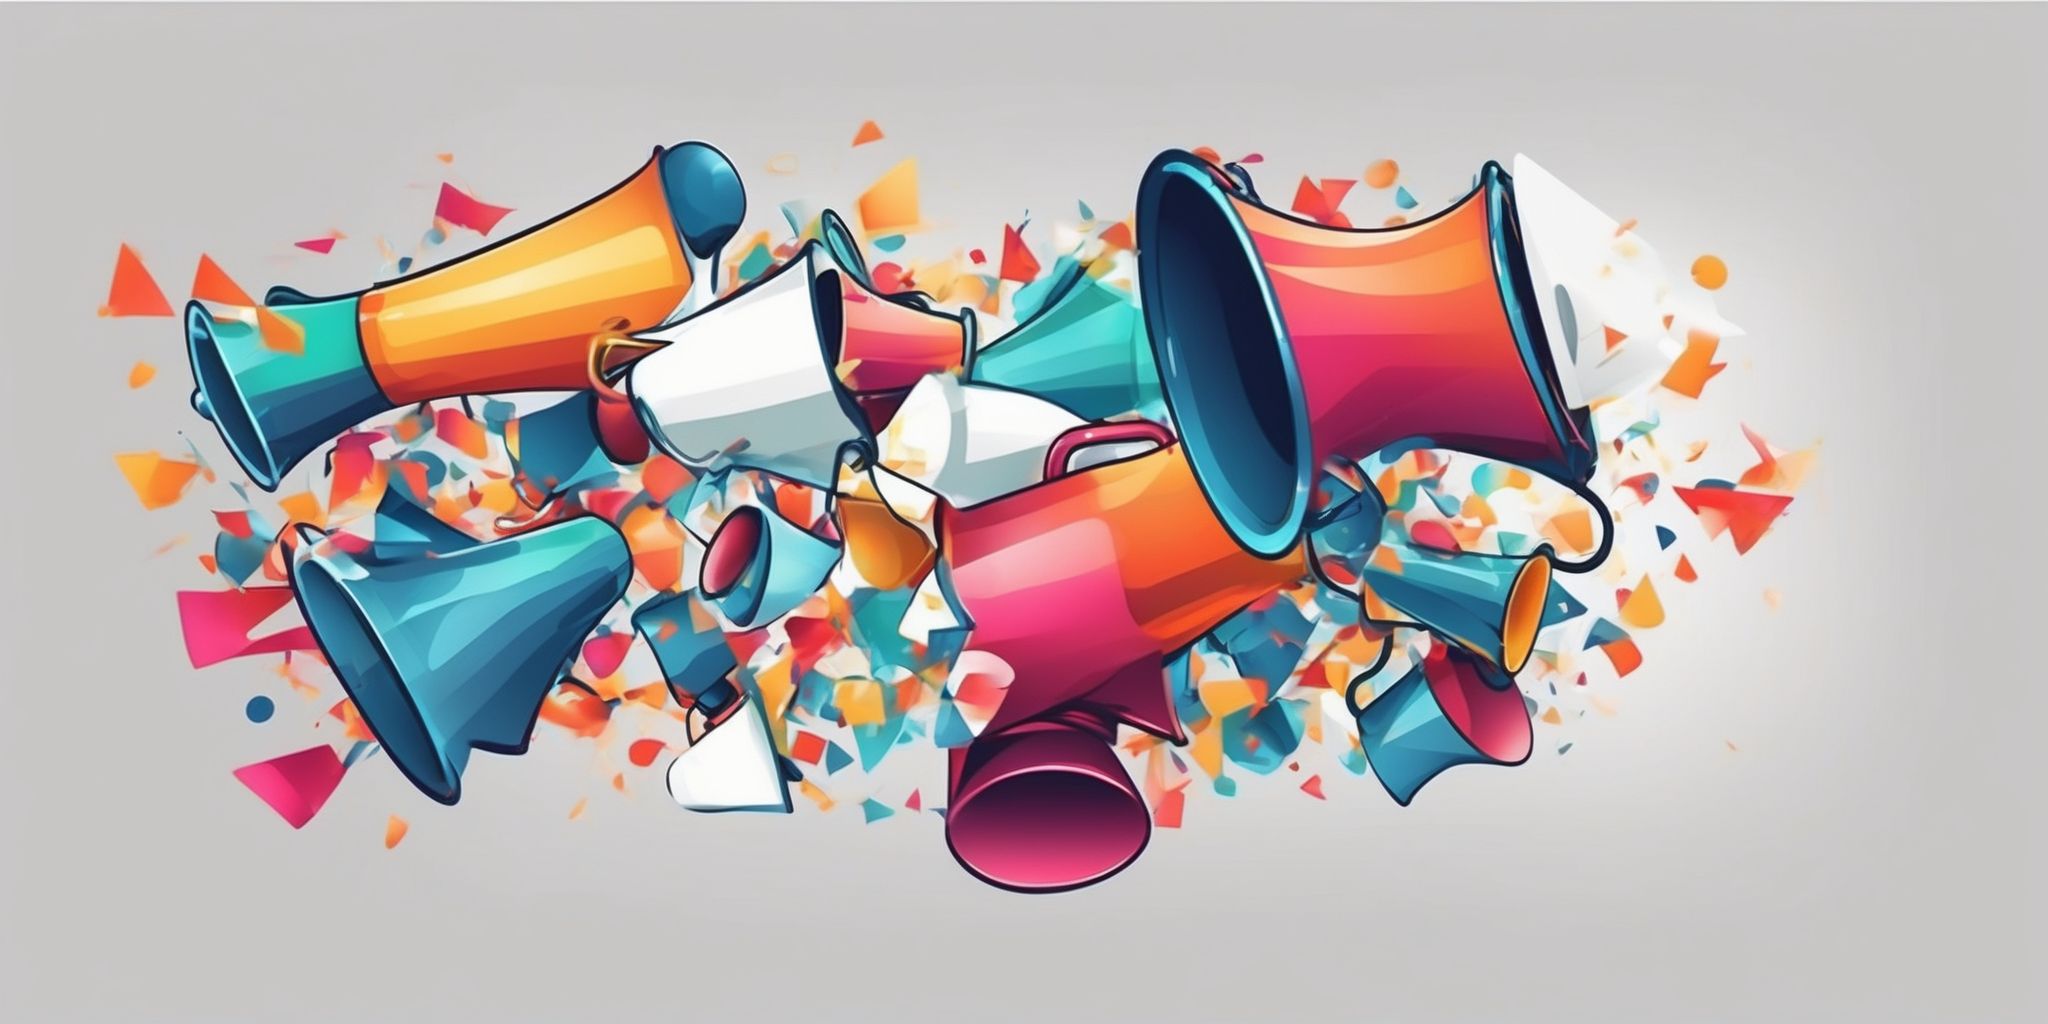 Megaphone in illustration style with gradients and white background